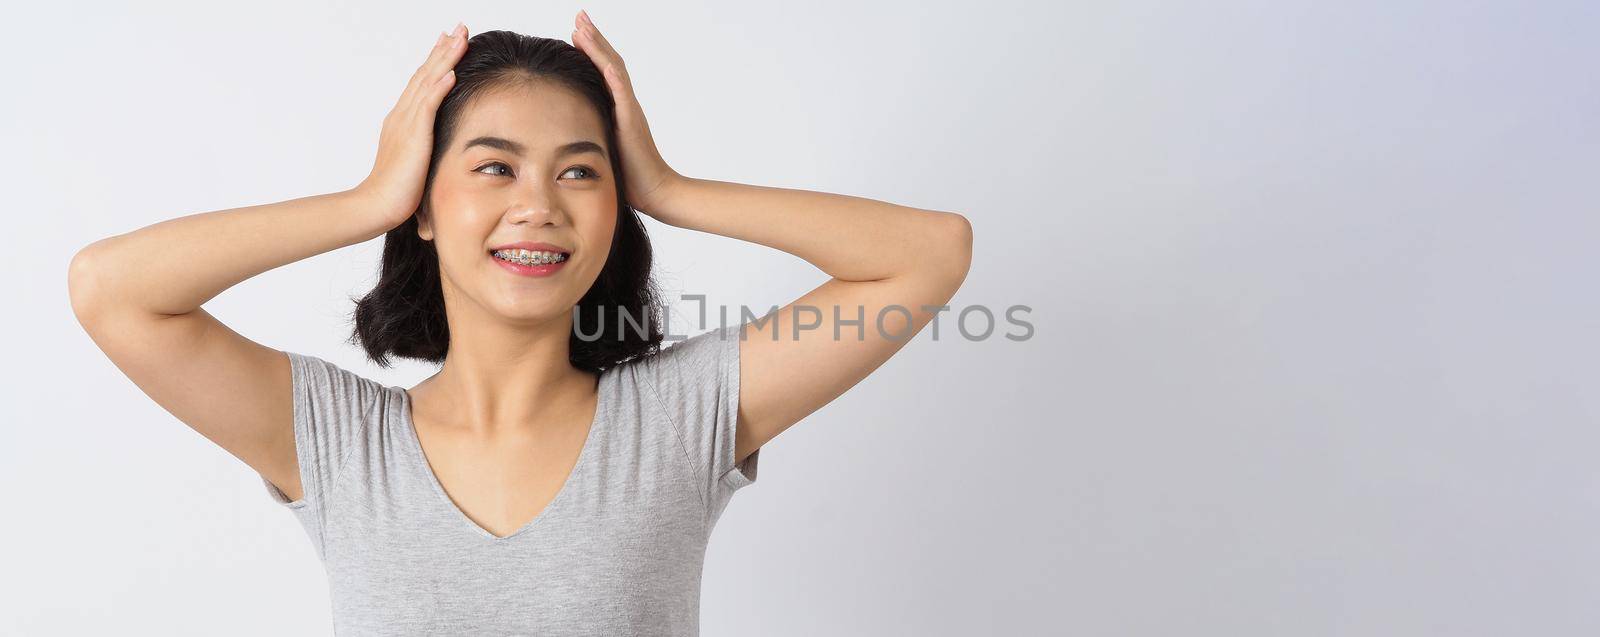 Dental brace teen girl smiling looking on a camera. by gnepphoto